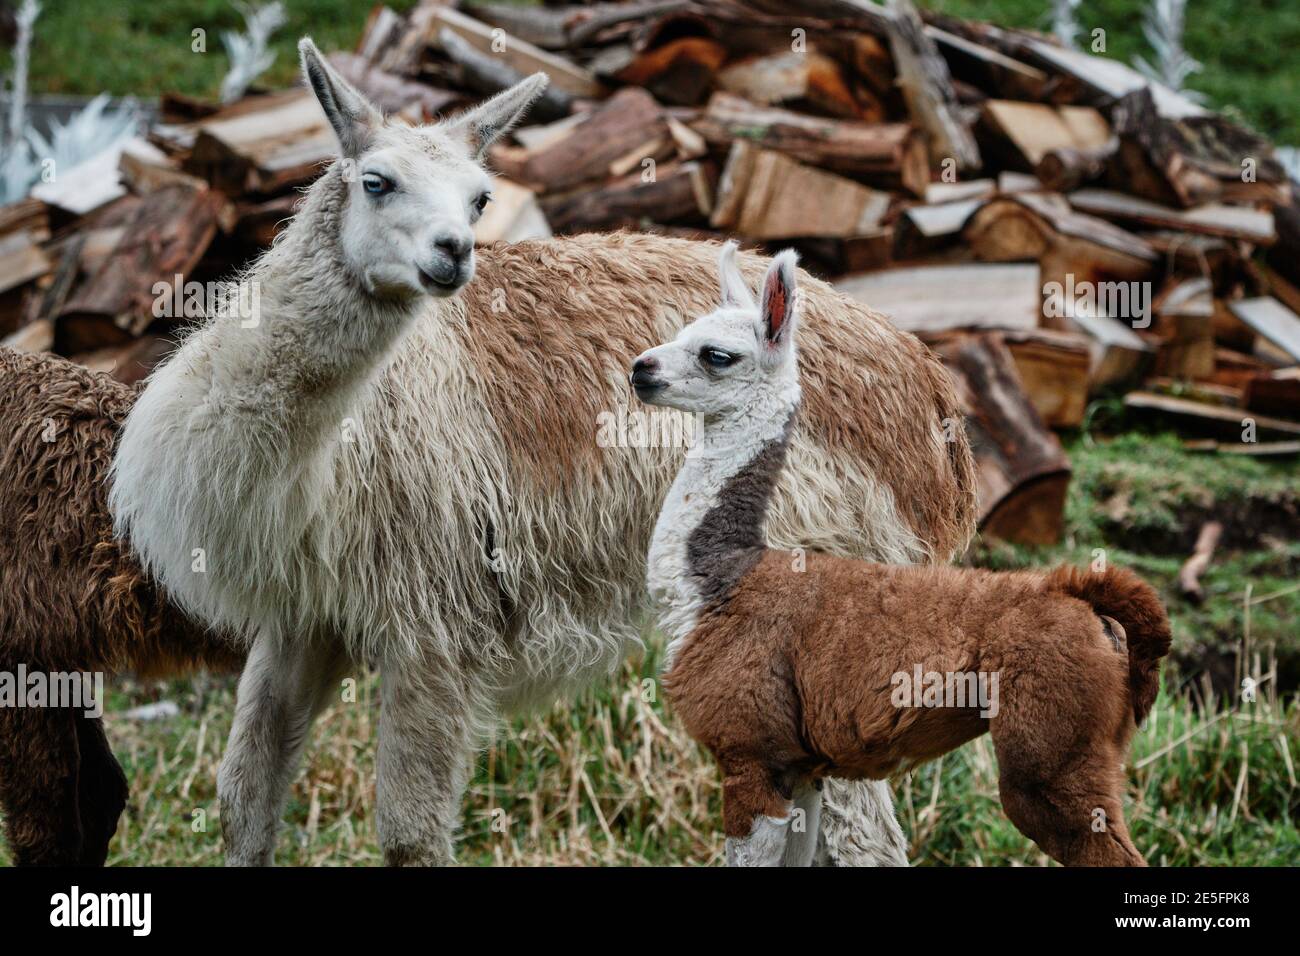 Llamas Alpaca in Andes Mountains, South America Stock Photo